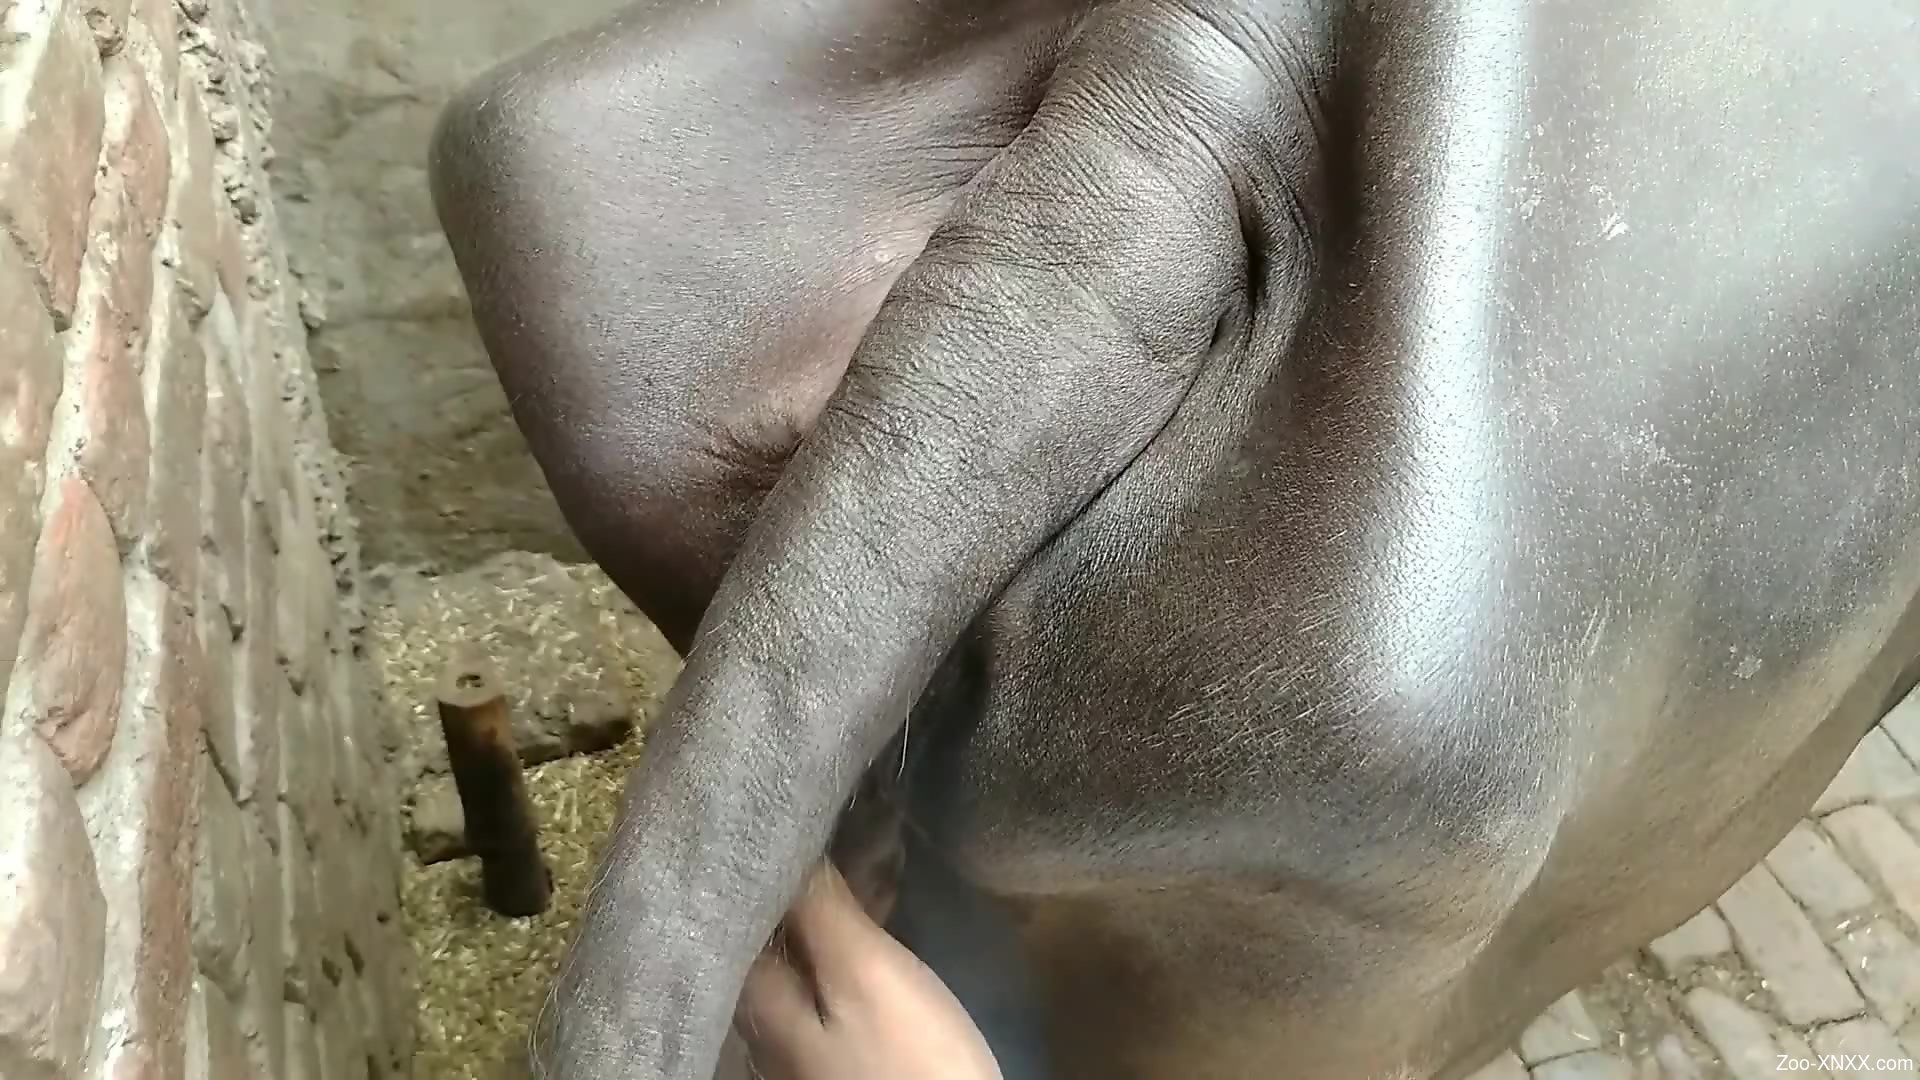 Man wants to fuck this cows pussy in such a hard mode